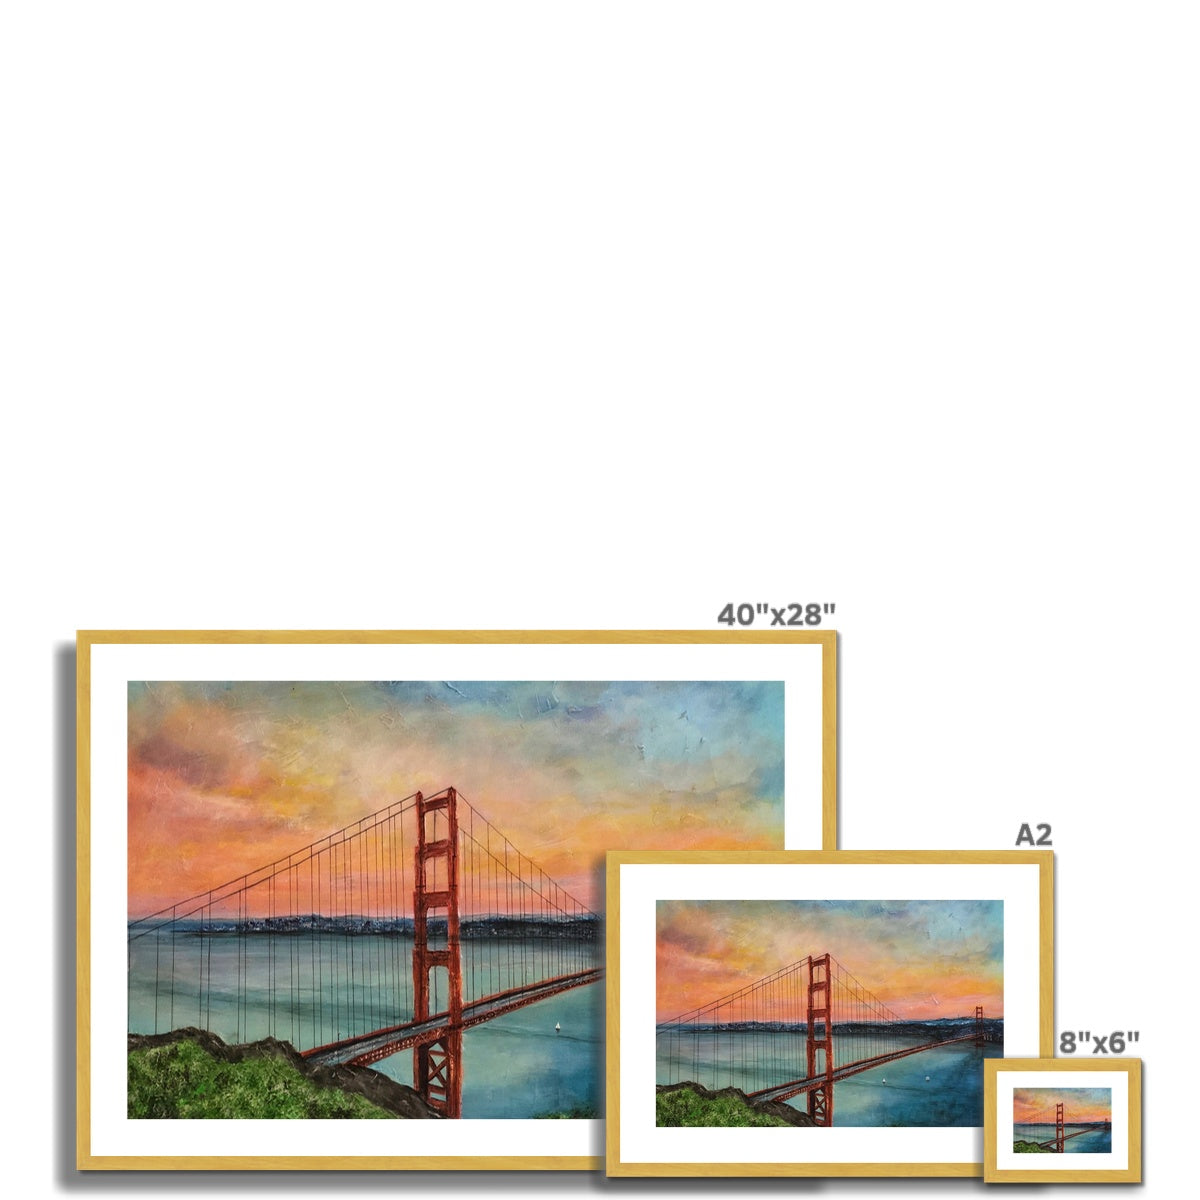 The Golden Gate Bridge Painting | Antique Framed & Mounted Prints From Scotland-Antique Framed & Mounted Prints-World Art Gallery-Paintings, Prints, Homeware, Art Gifts From Scotland By Scottish Artist Kevin Hunter